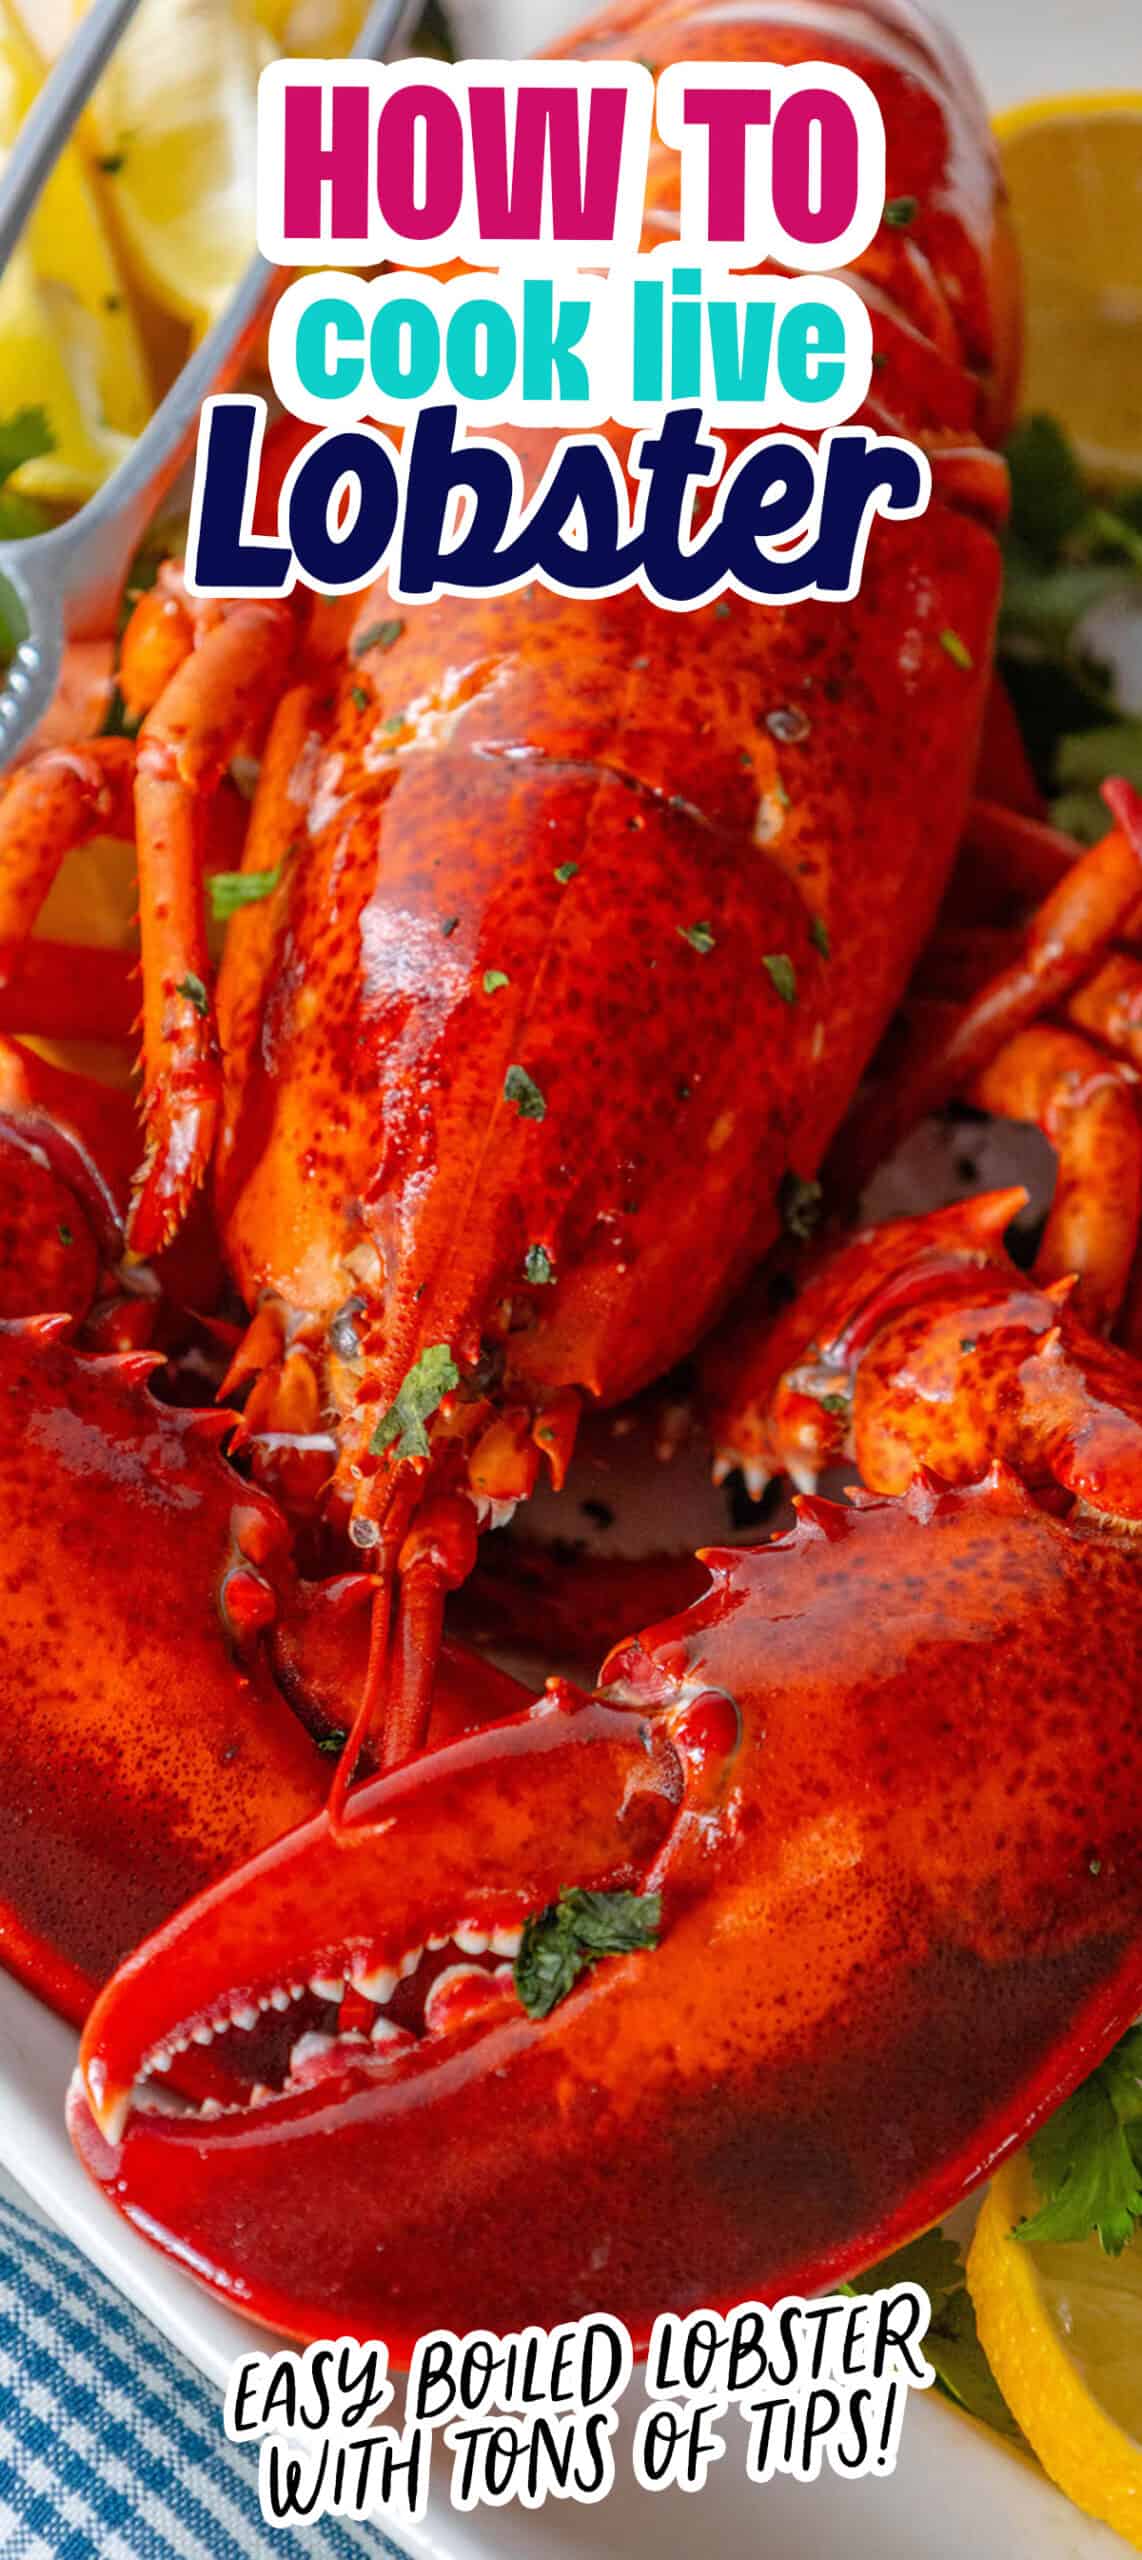 Learn the art of cooking a live lobster.